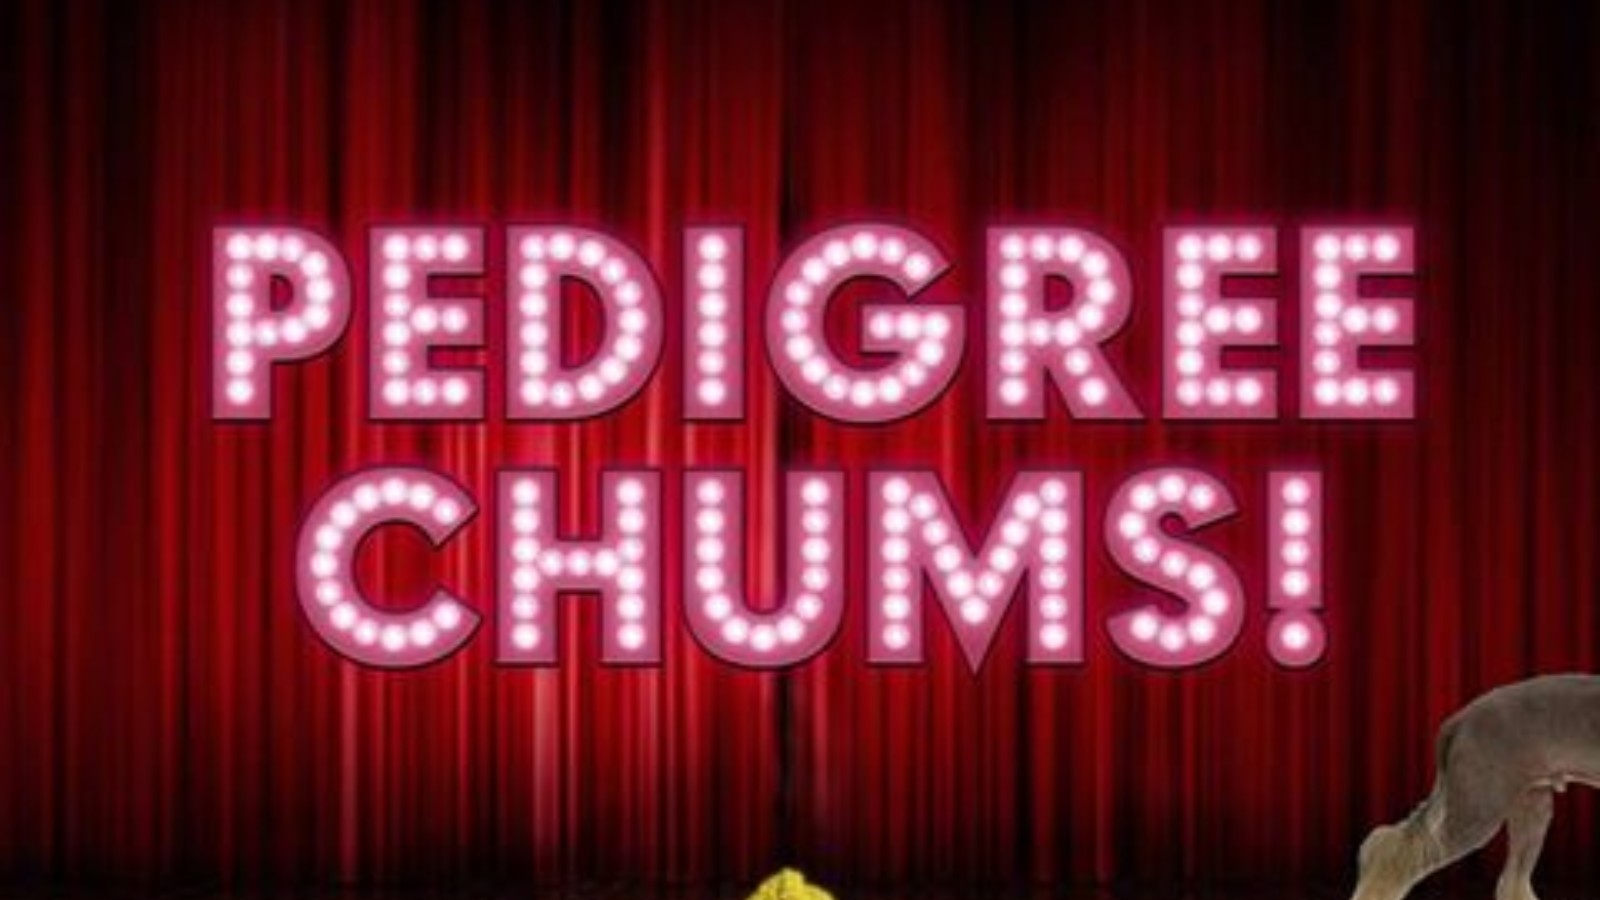 The words 'PEDIGREE CHUMS!' are in large pink lights against a red curtain background on a stage. A dog is half visible walking off the stage.